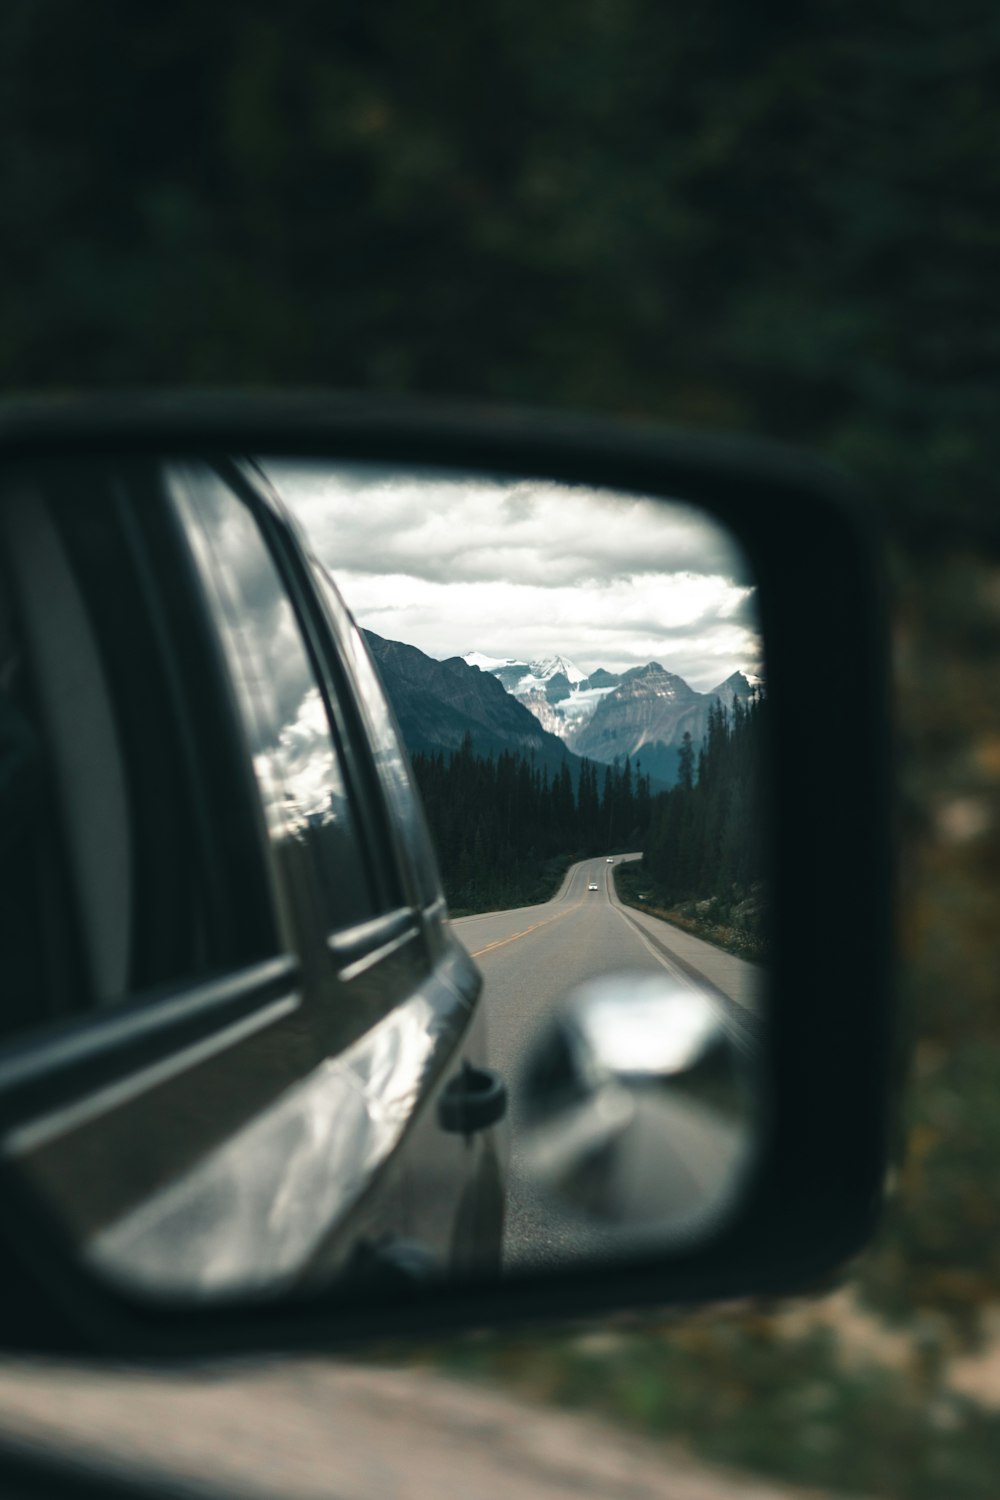 a car's side view mirror reflecting a mountain range